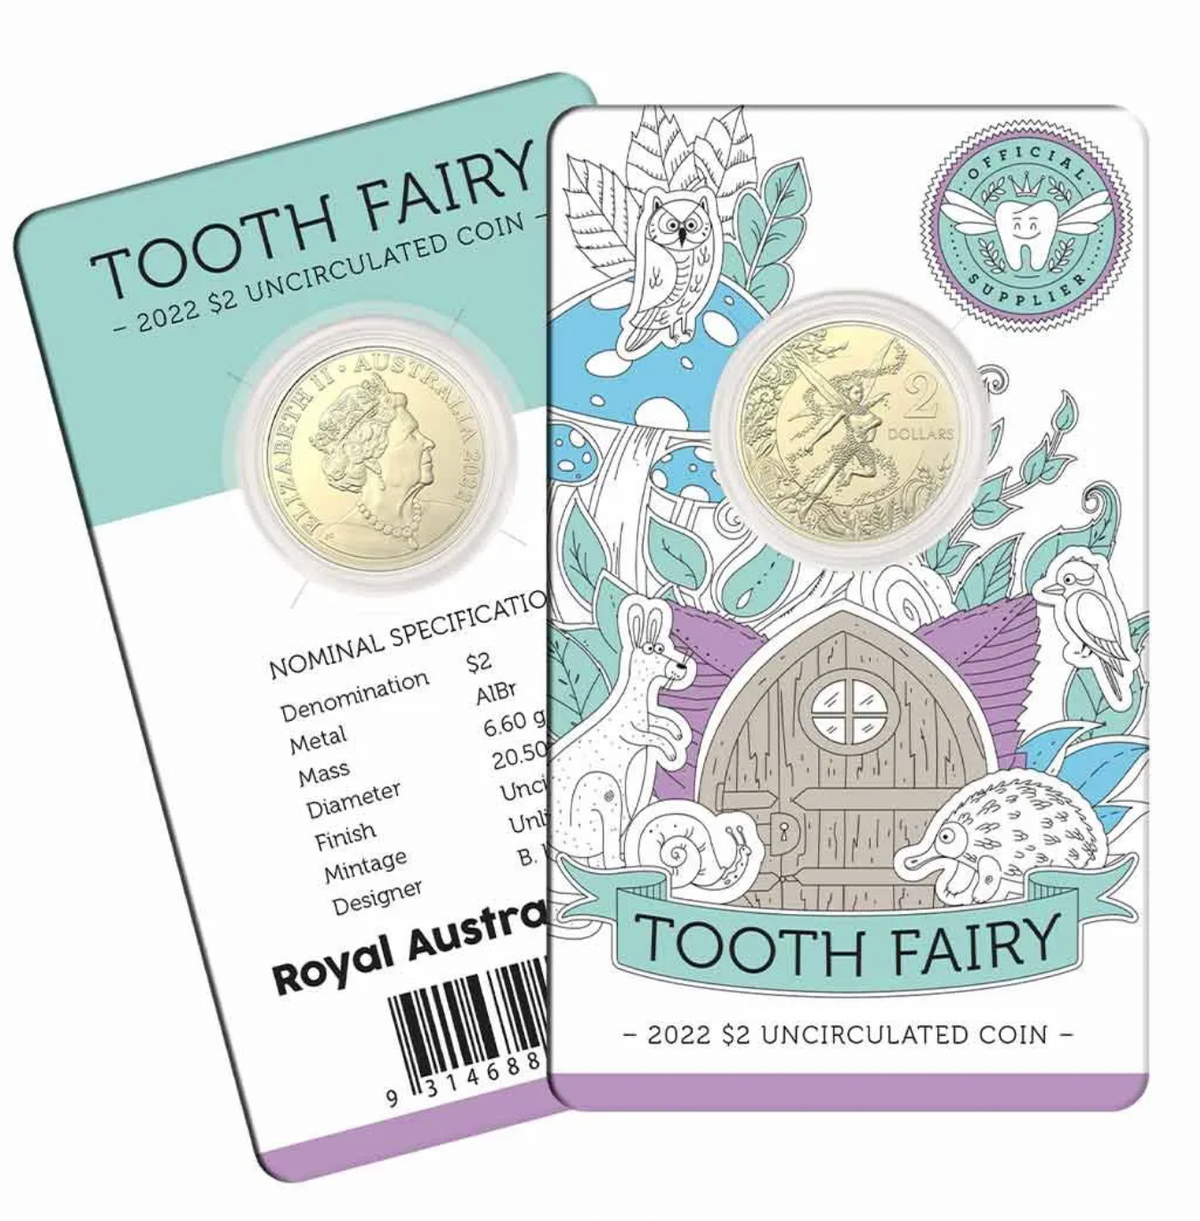 2022 Tooth Fairy $2 Uncirculated Carded Coin.